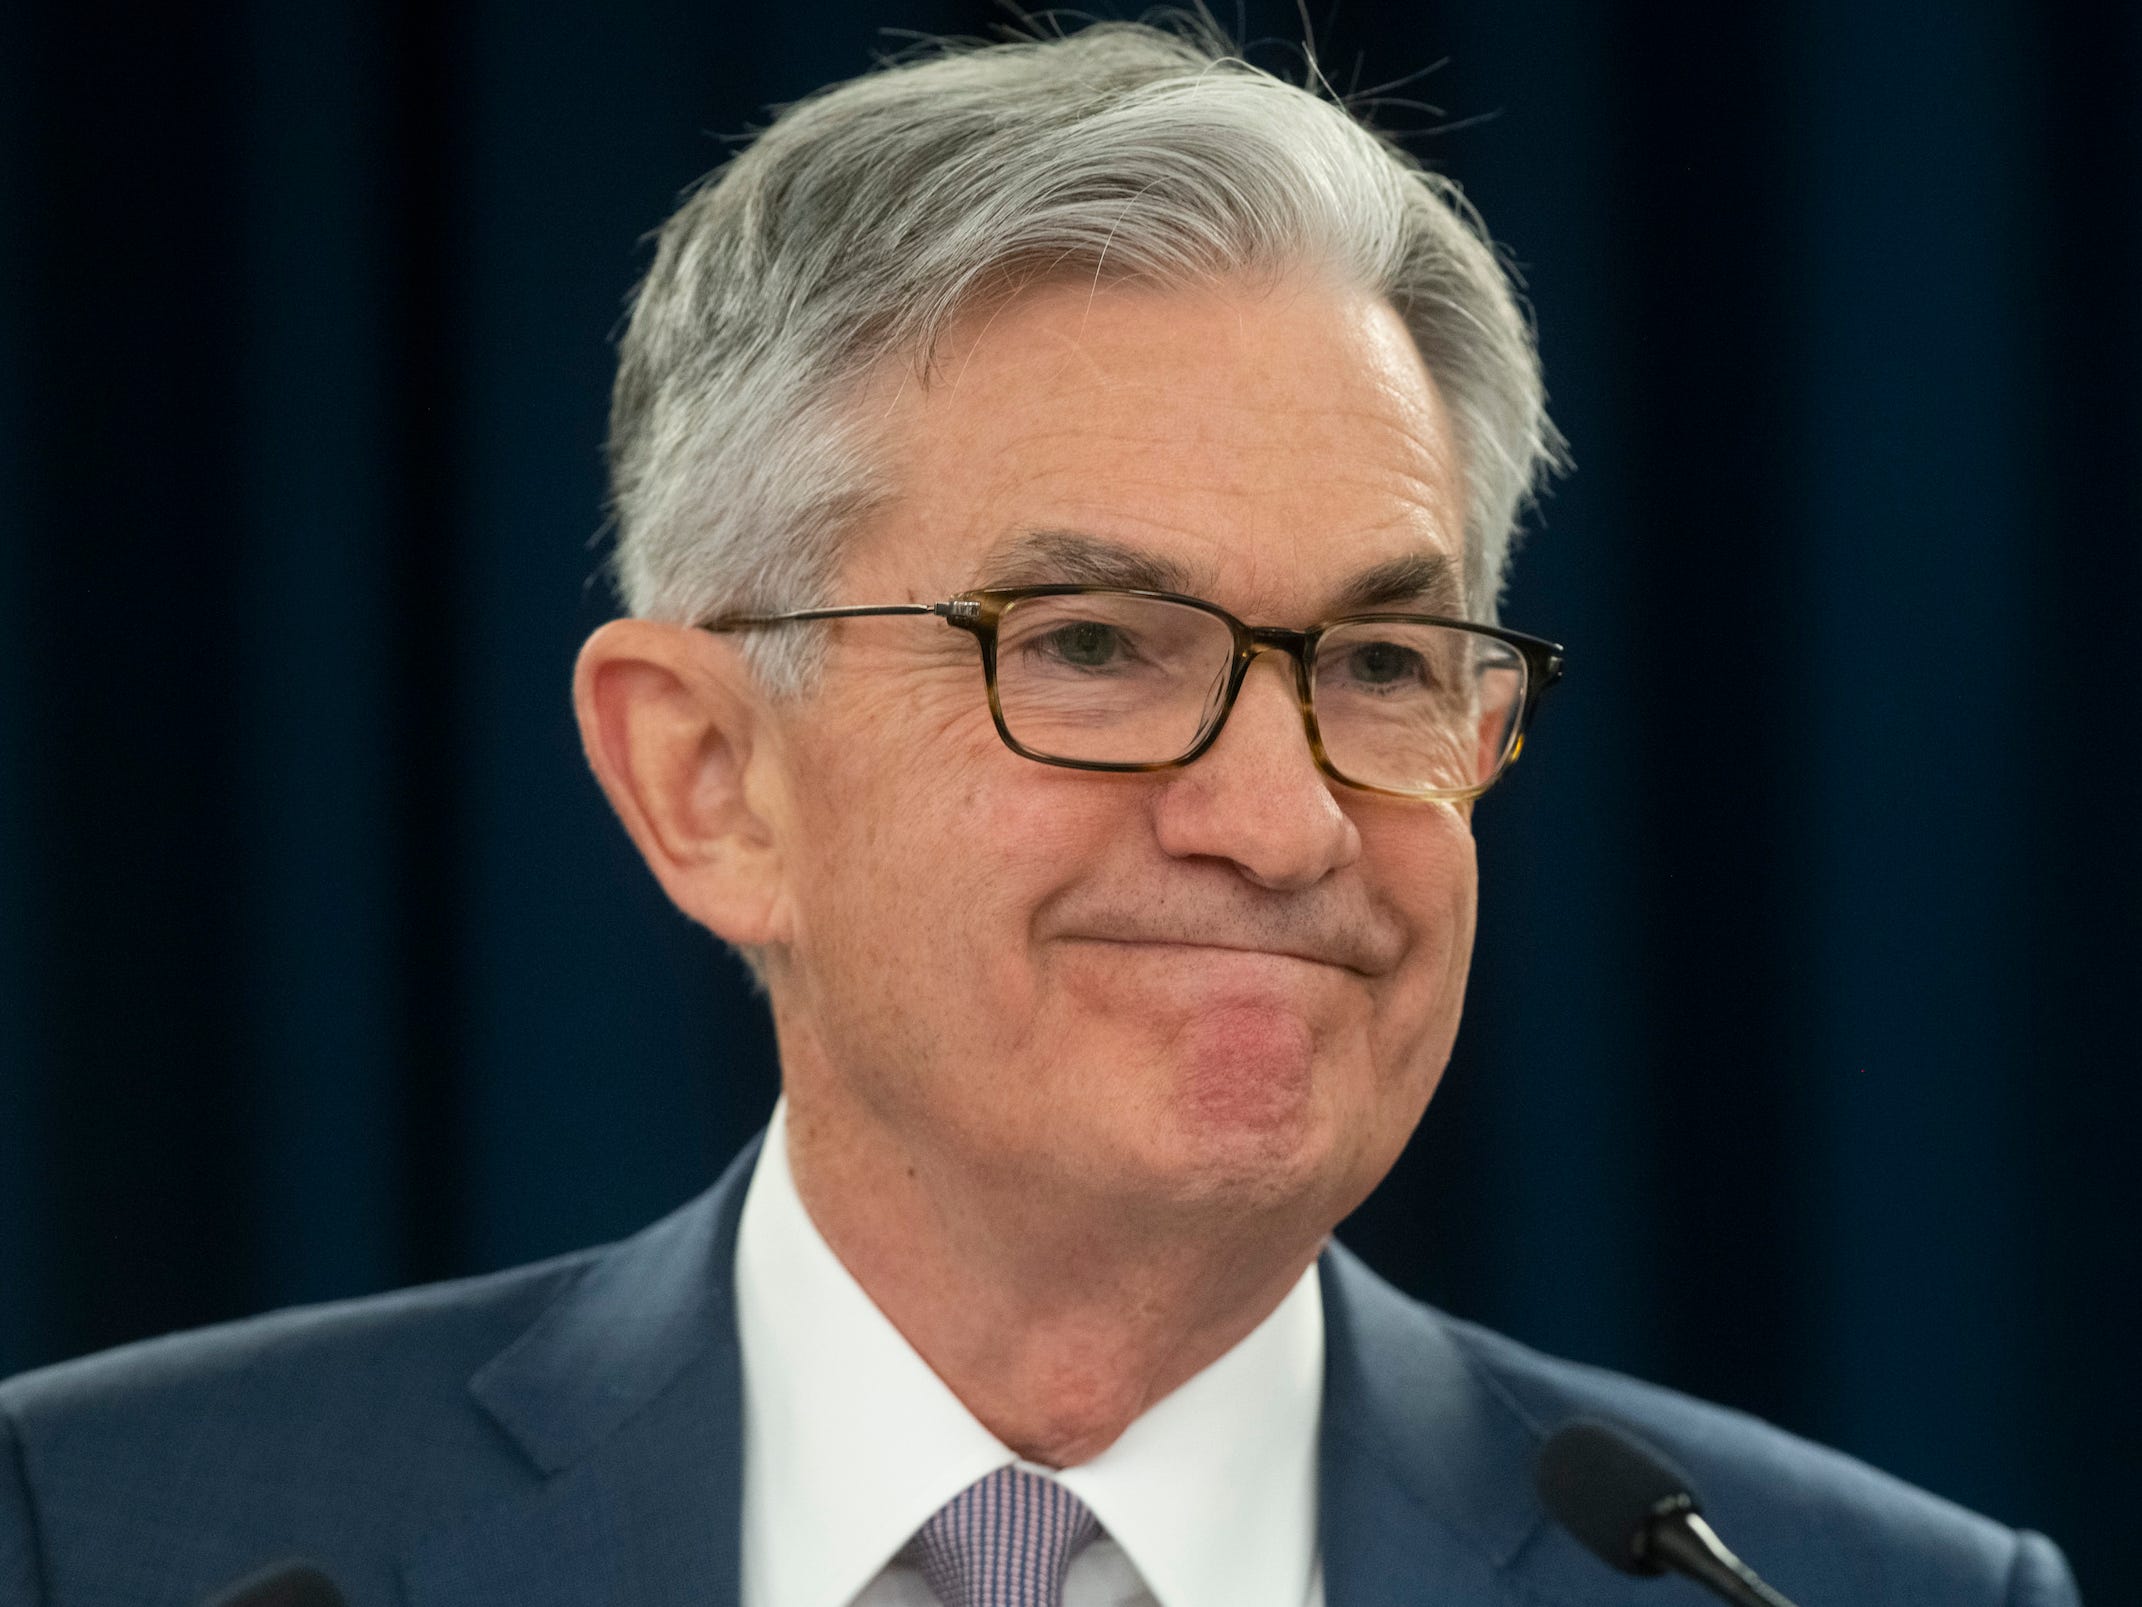 federal Reserve Chairman Jerome Powell